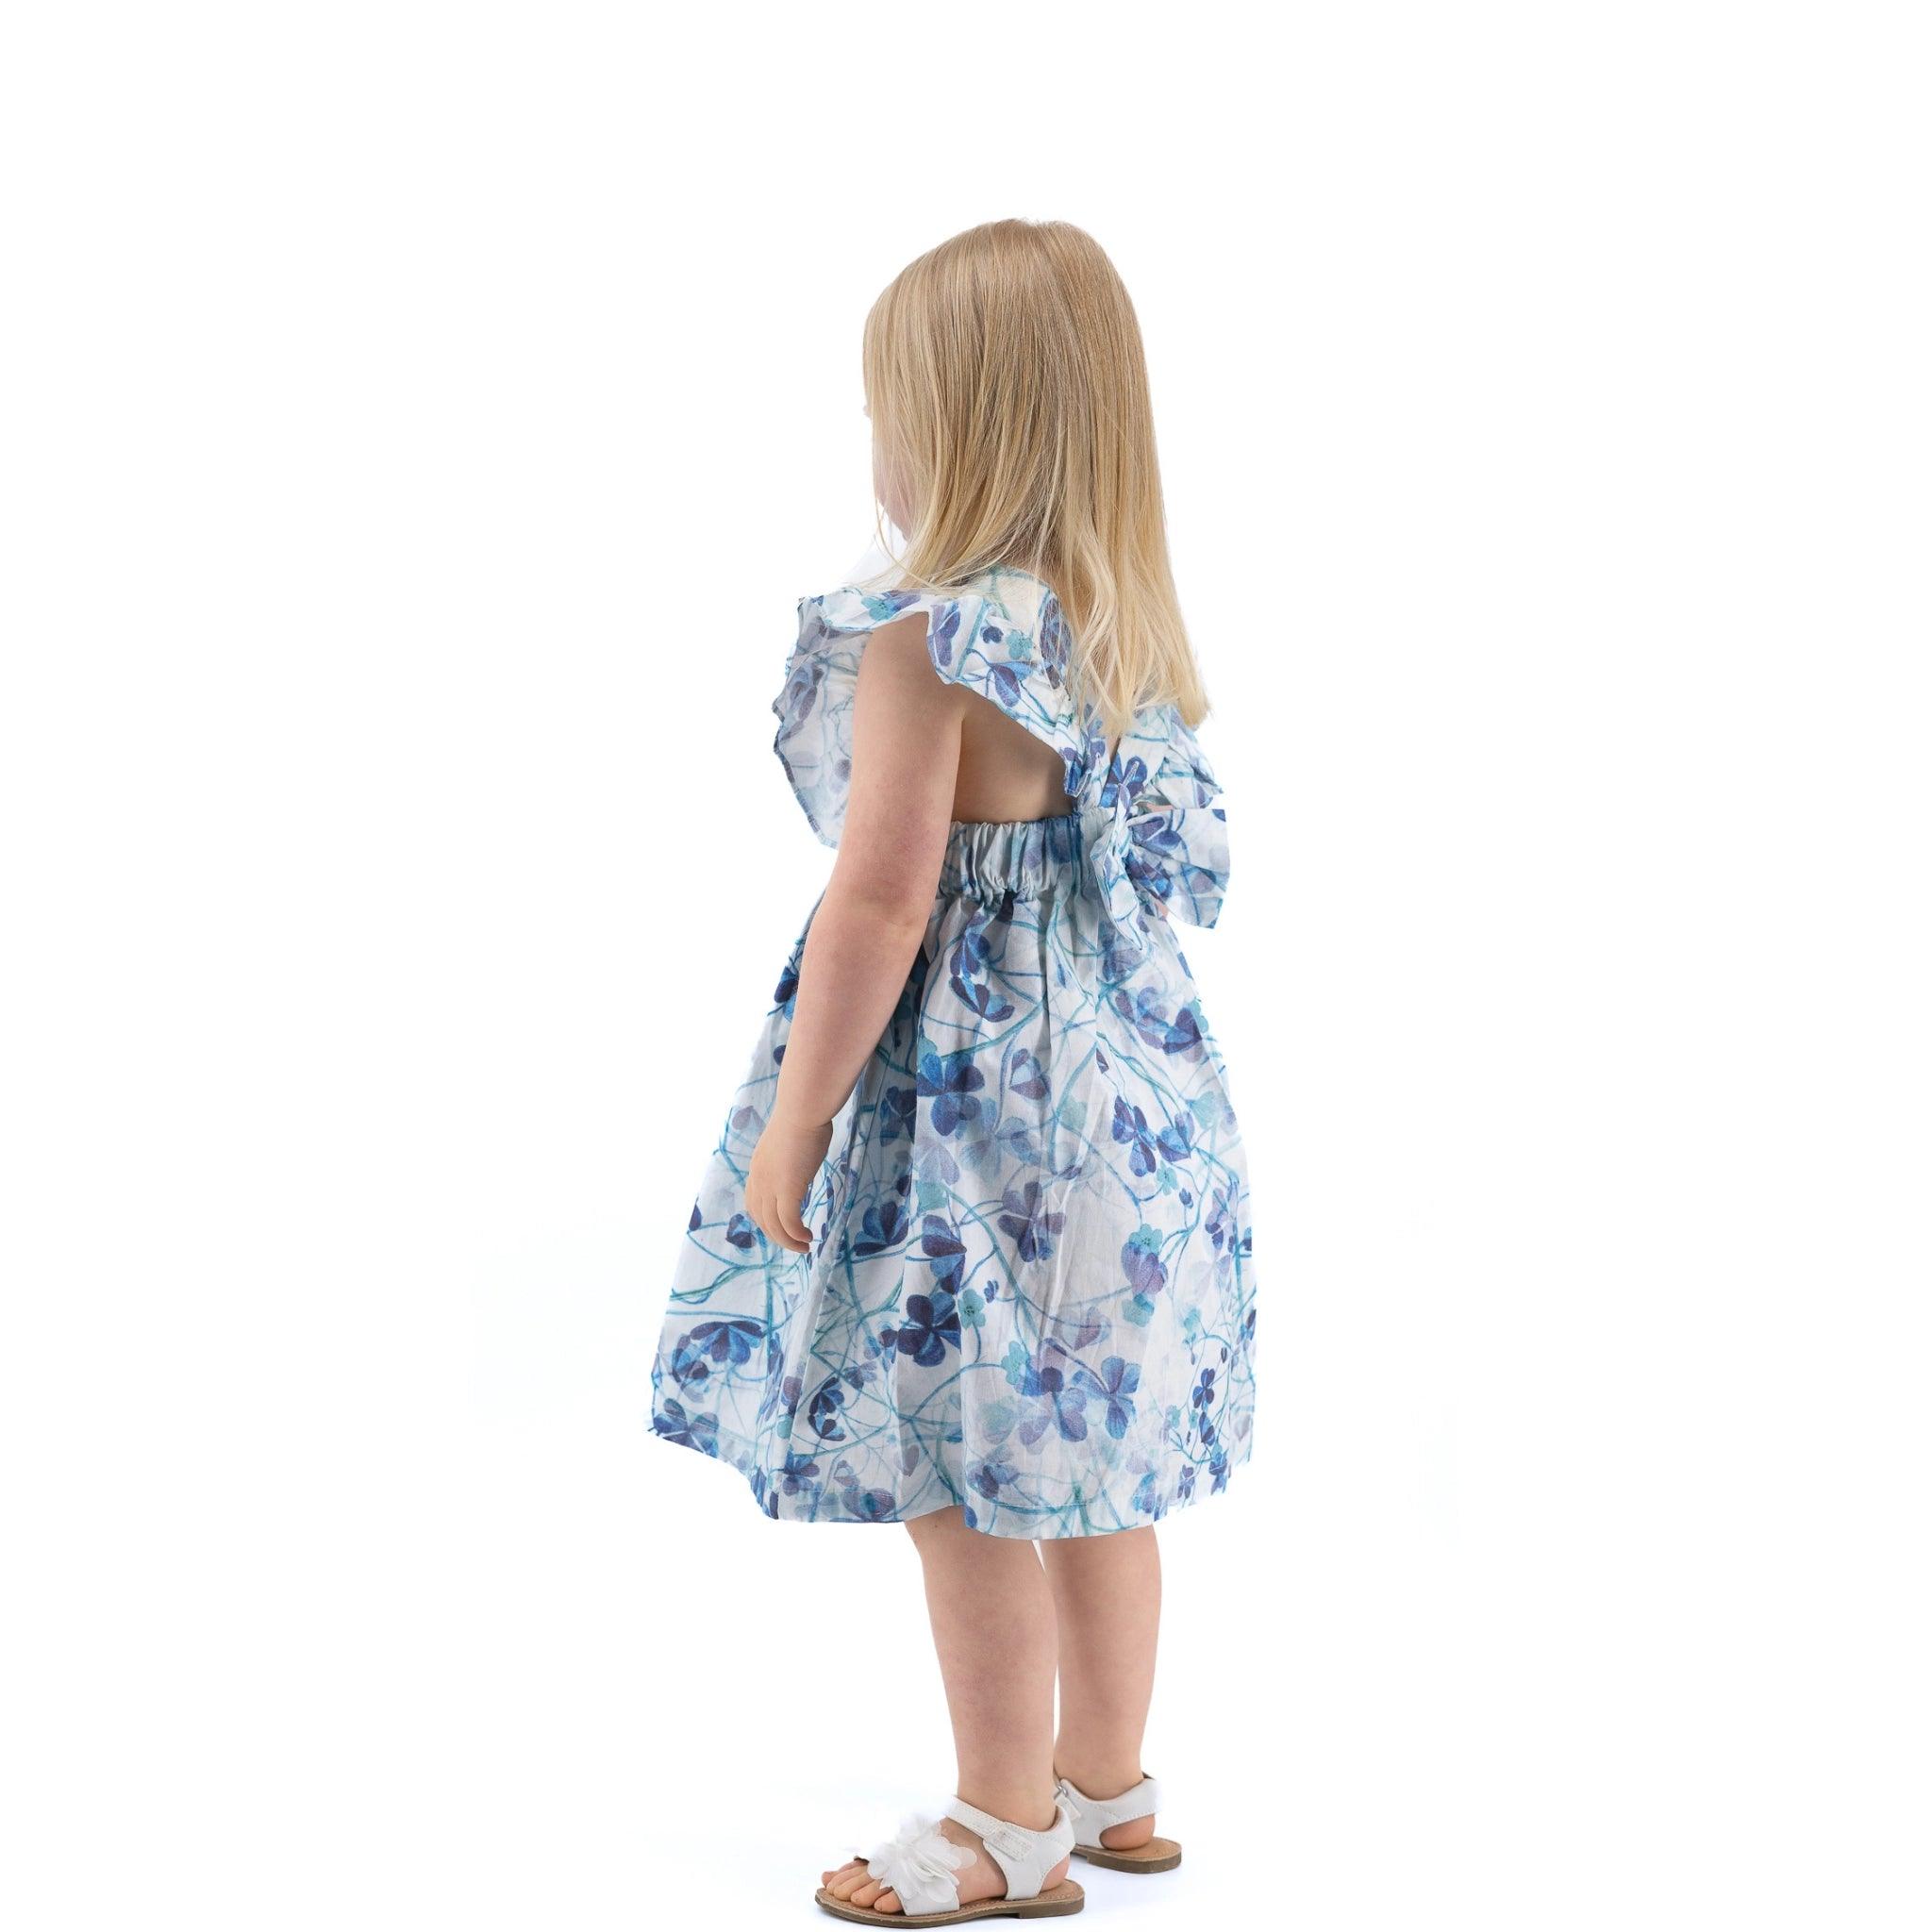 Young girl in a Karee blue cotton floral dress standing with her back turned to the camera on a white background.